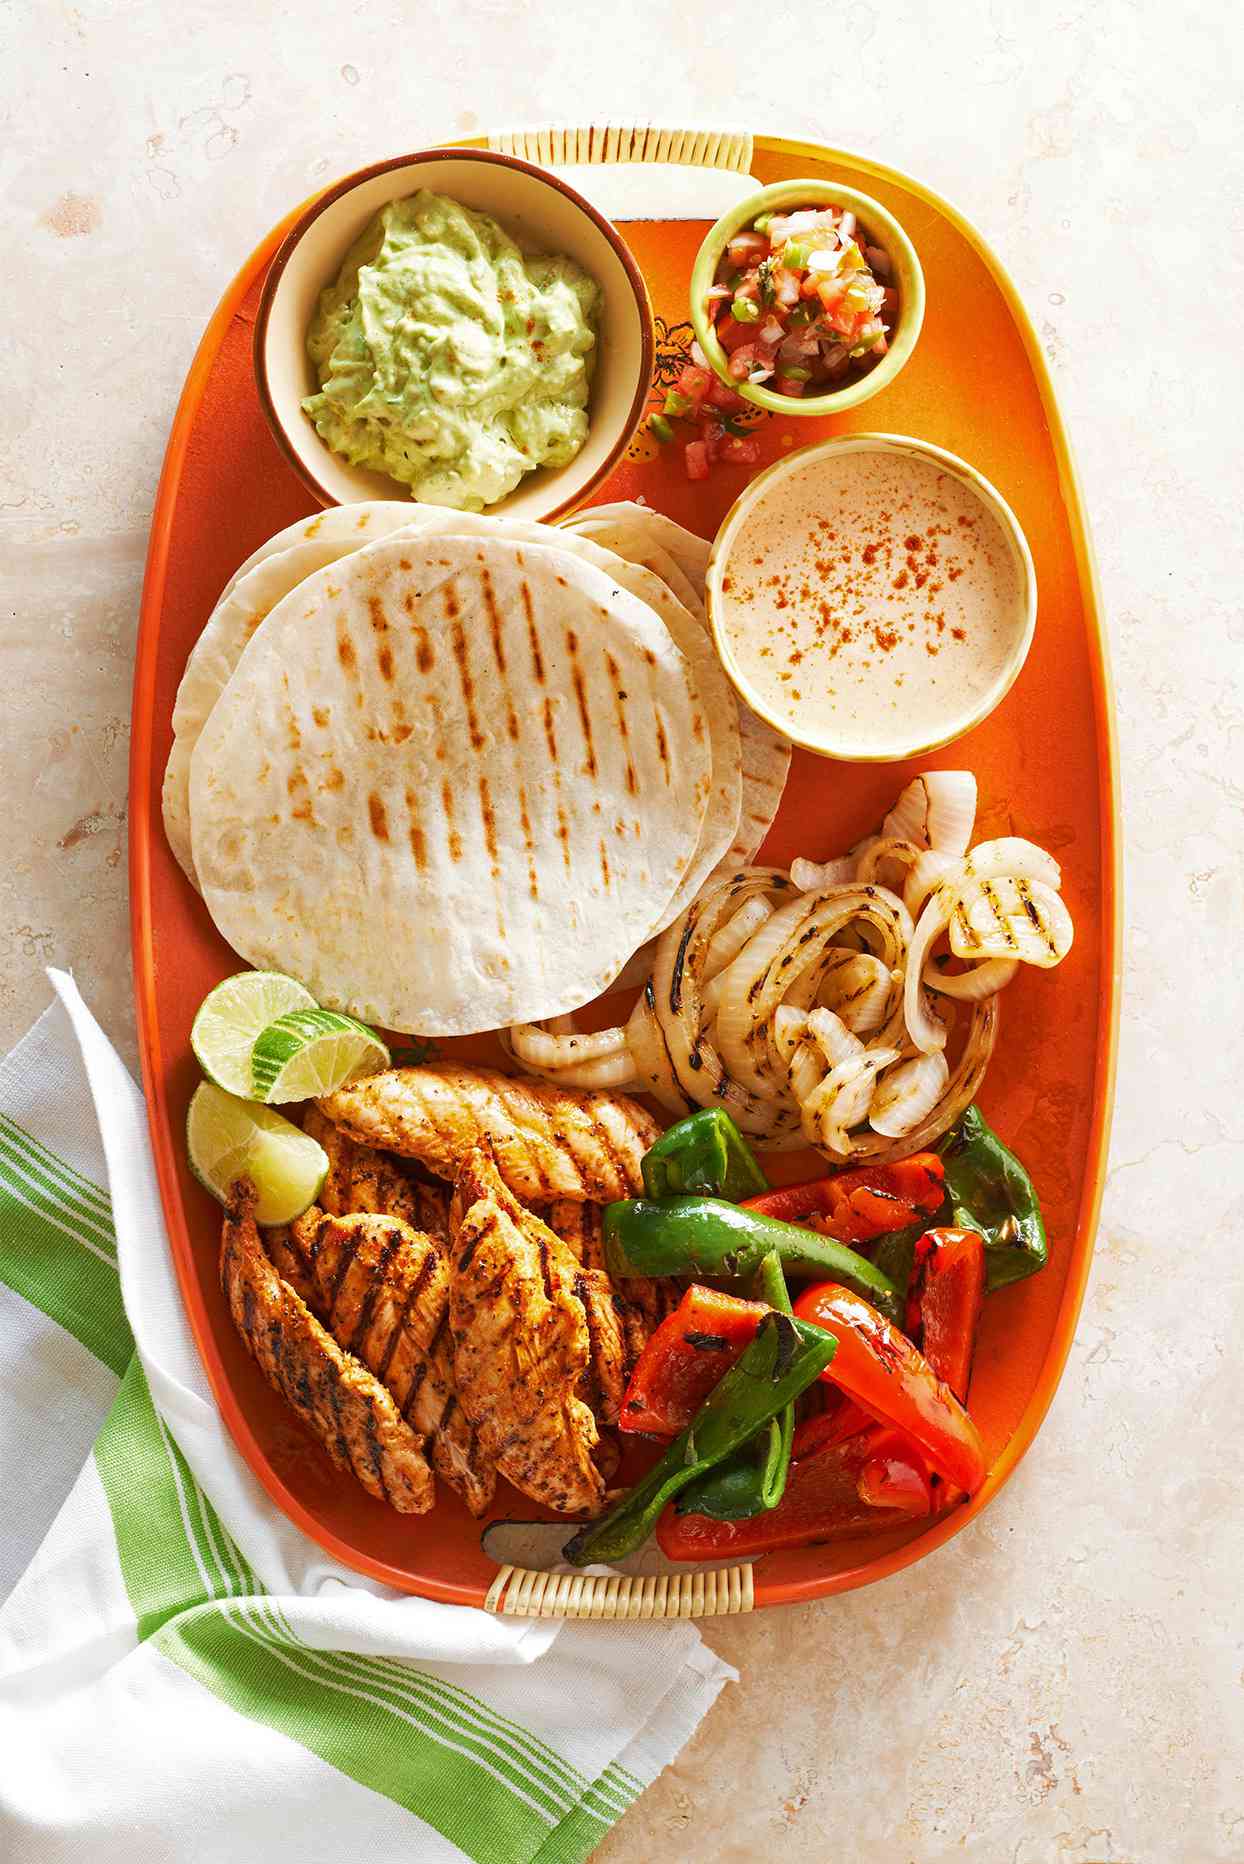 Grilled Chicken-Finger Fajitas with Peppers and Onions